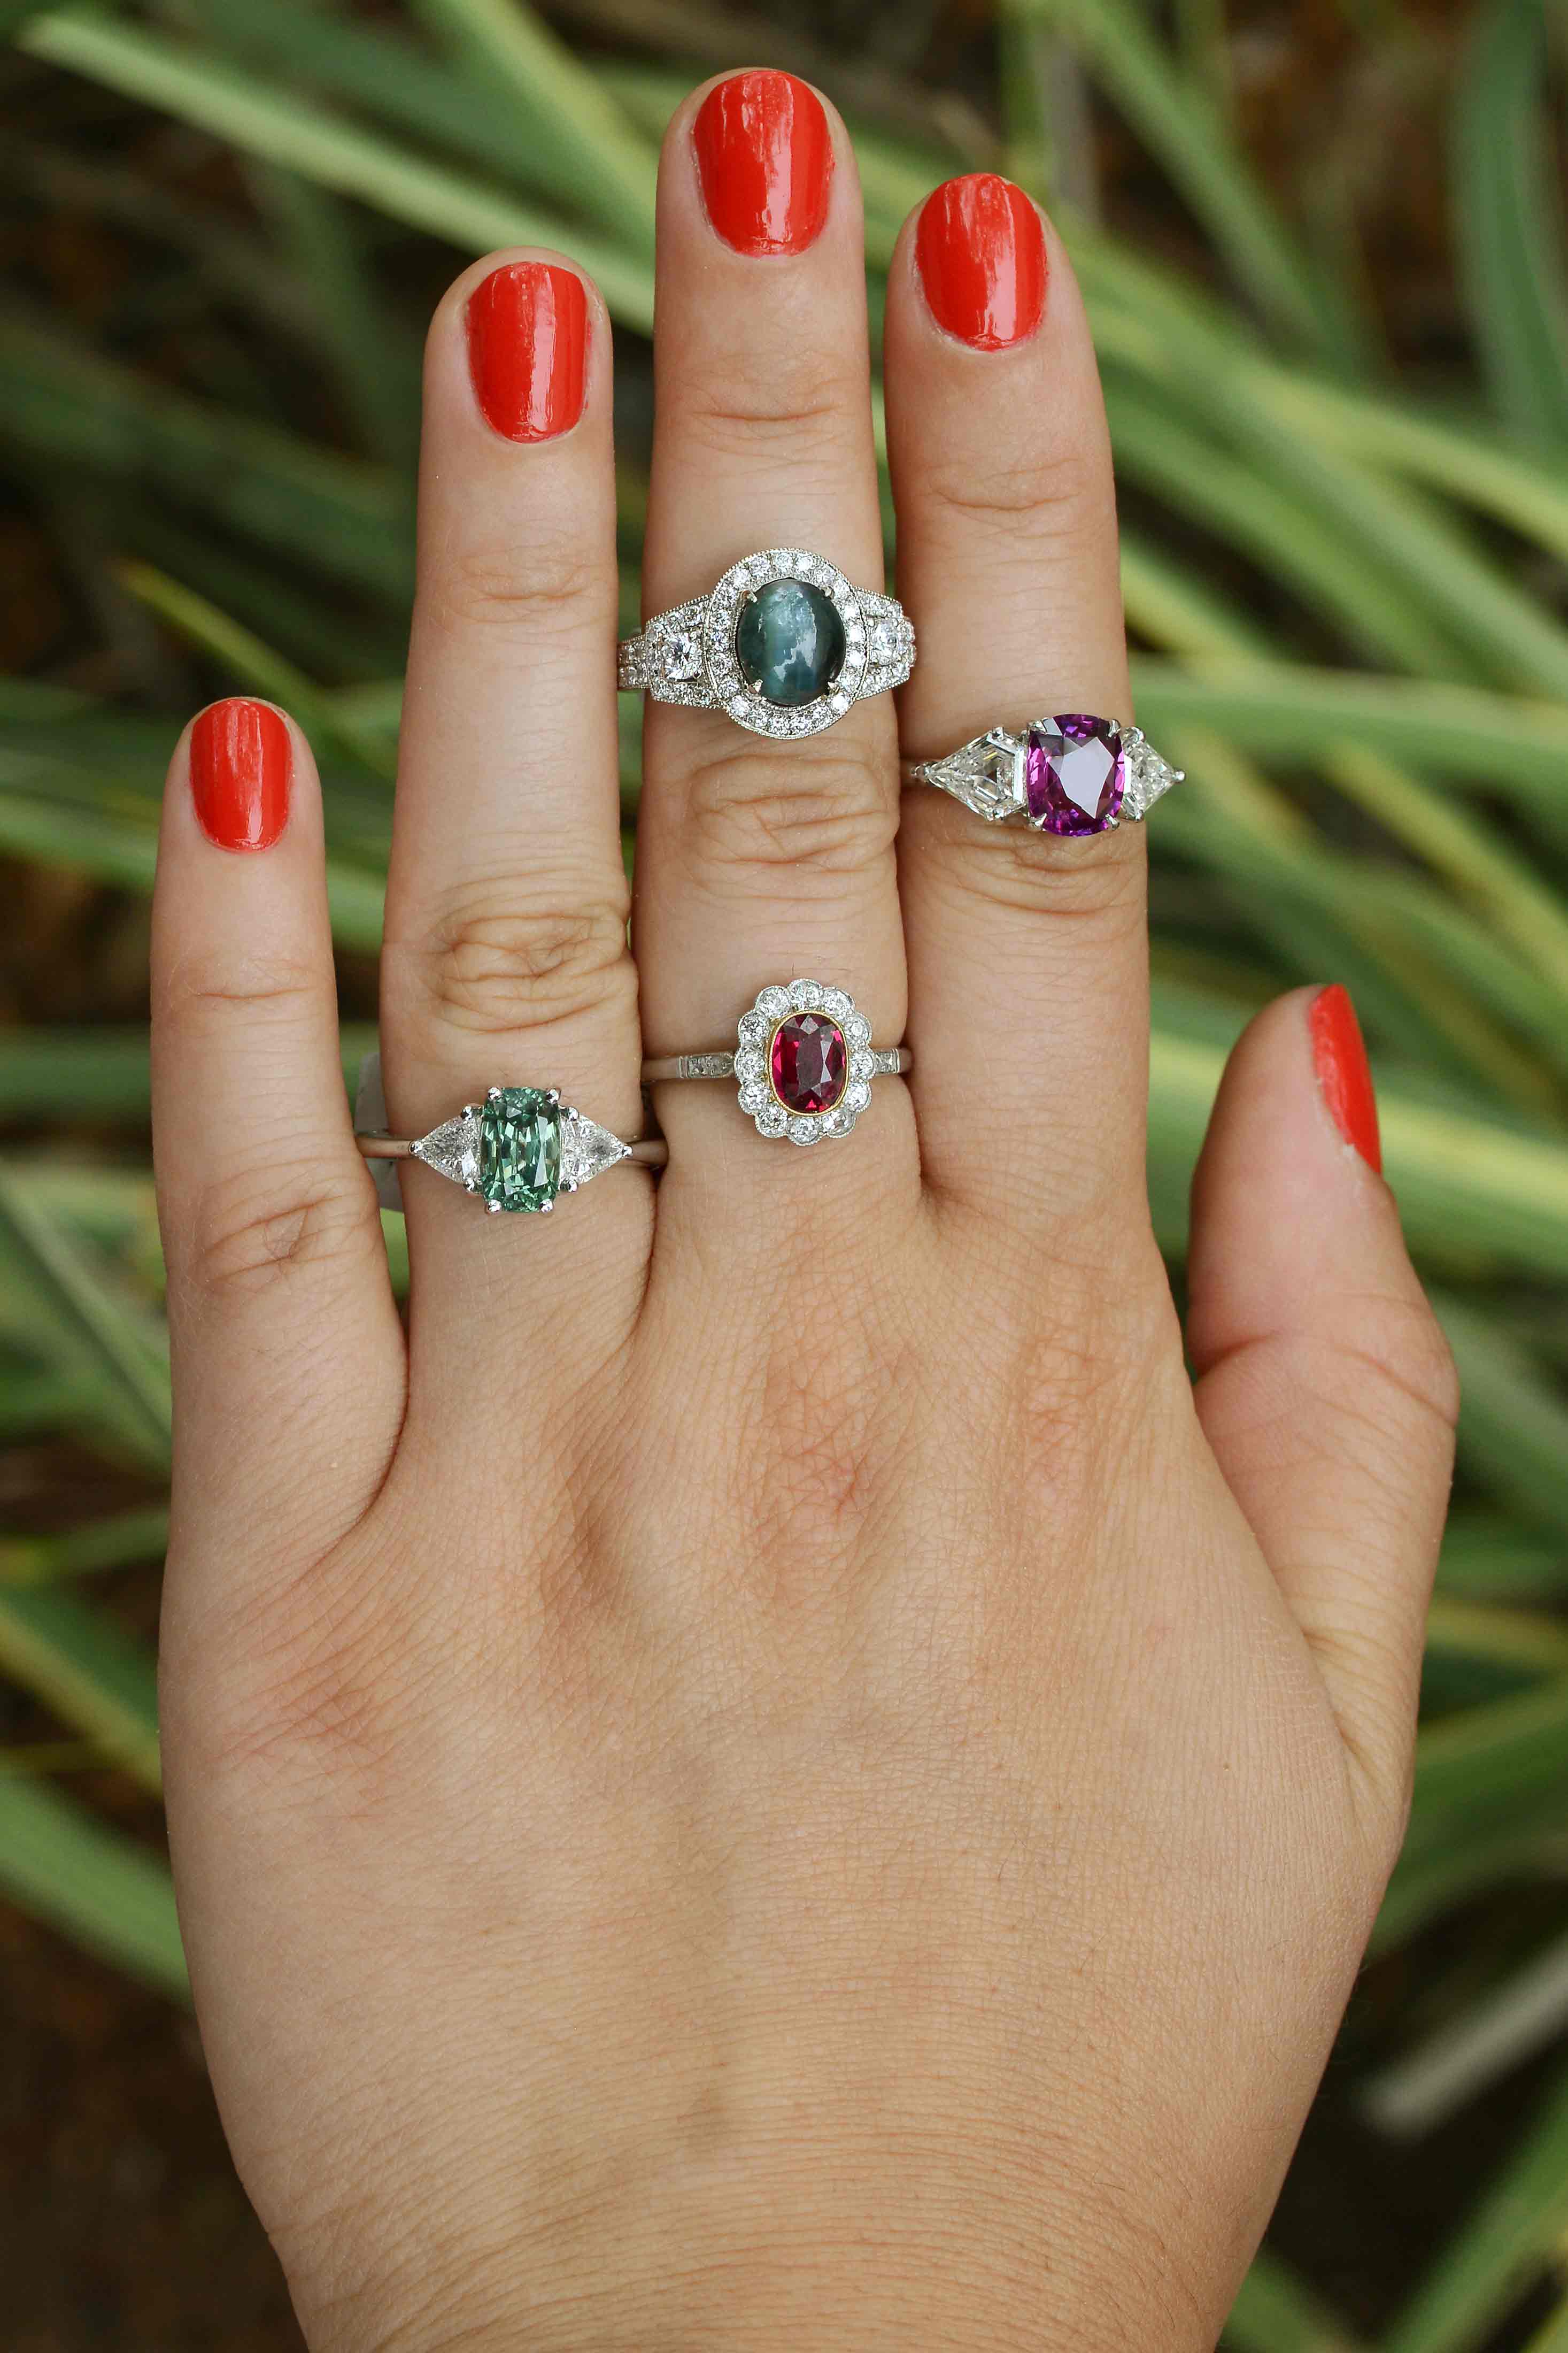 Some of our gemstone & diamond engagement rings from modern eras.